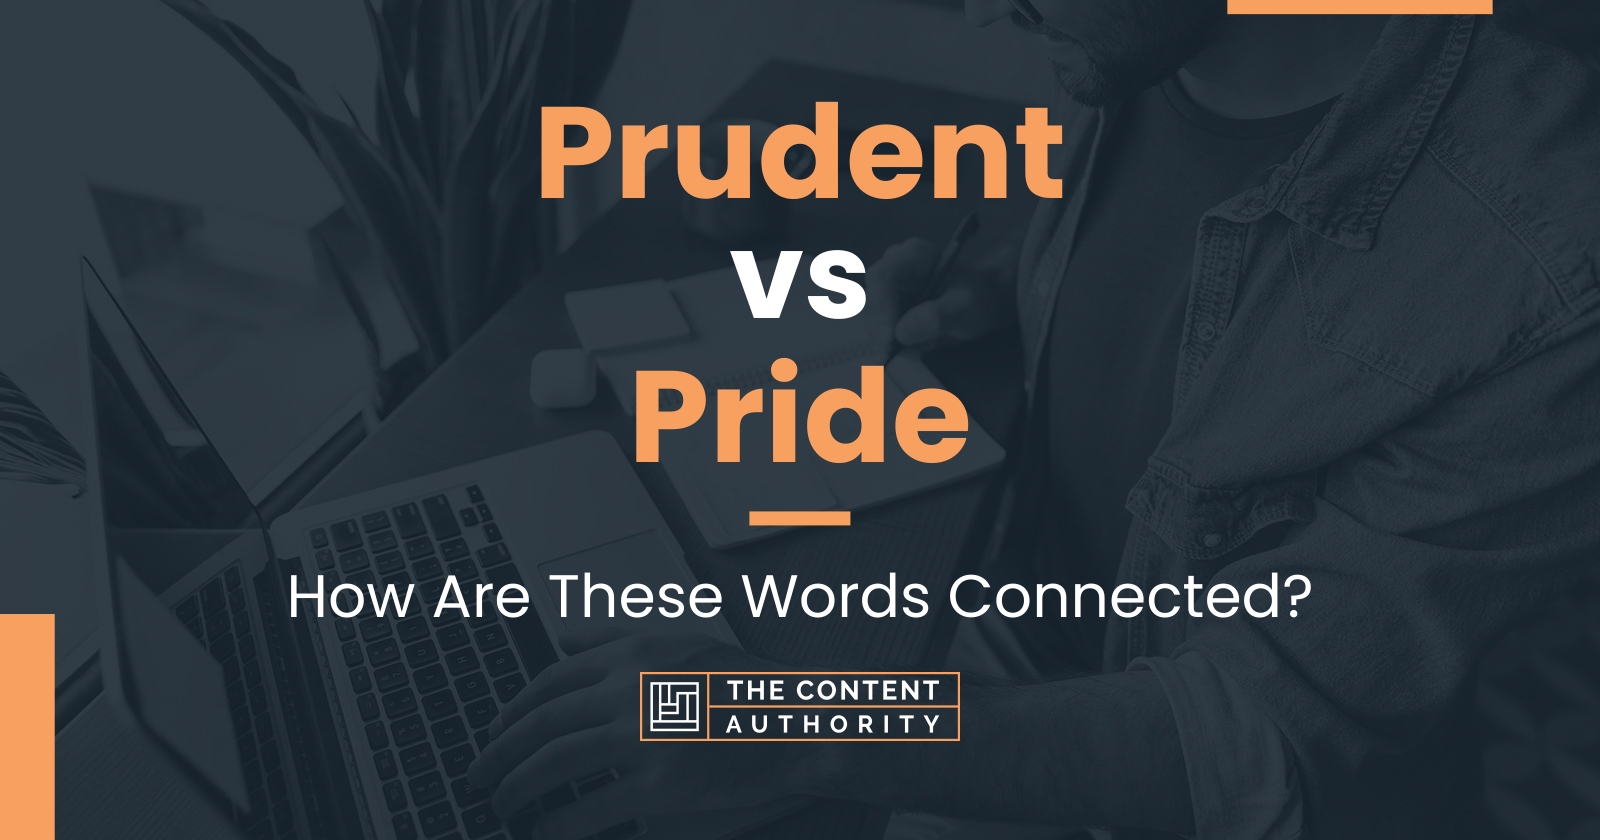 Prudent vs Pride: How Are These Words Connected?